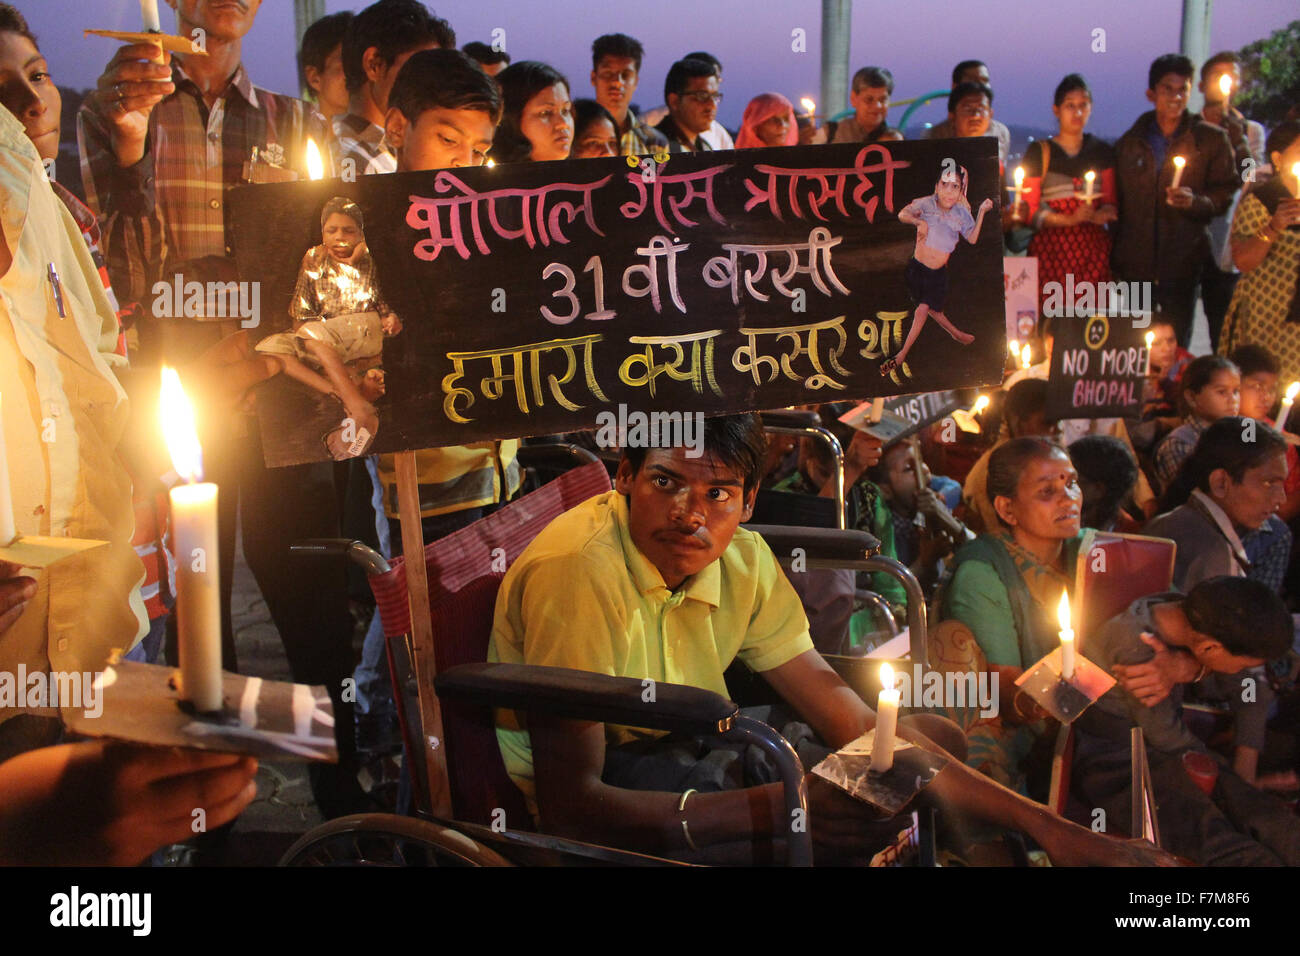 Bhopal, India. 1st Dec, 2015. Survivors' descendants with congenital disabilities light candles during a vigil marking the 31st anniversary of the gas tragedy in Bhopal, India, Dec. 1, 2015. More than 15,000 residents were killed by the gas leakage from the Union Carbide pesticide plant on the night of Dec. 2 to 3, 1984 in Bhopal, considered the world's worst industrial disaster. © Stringer/Xinhua/Alamy Live News Stock Photo